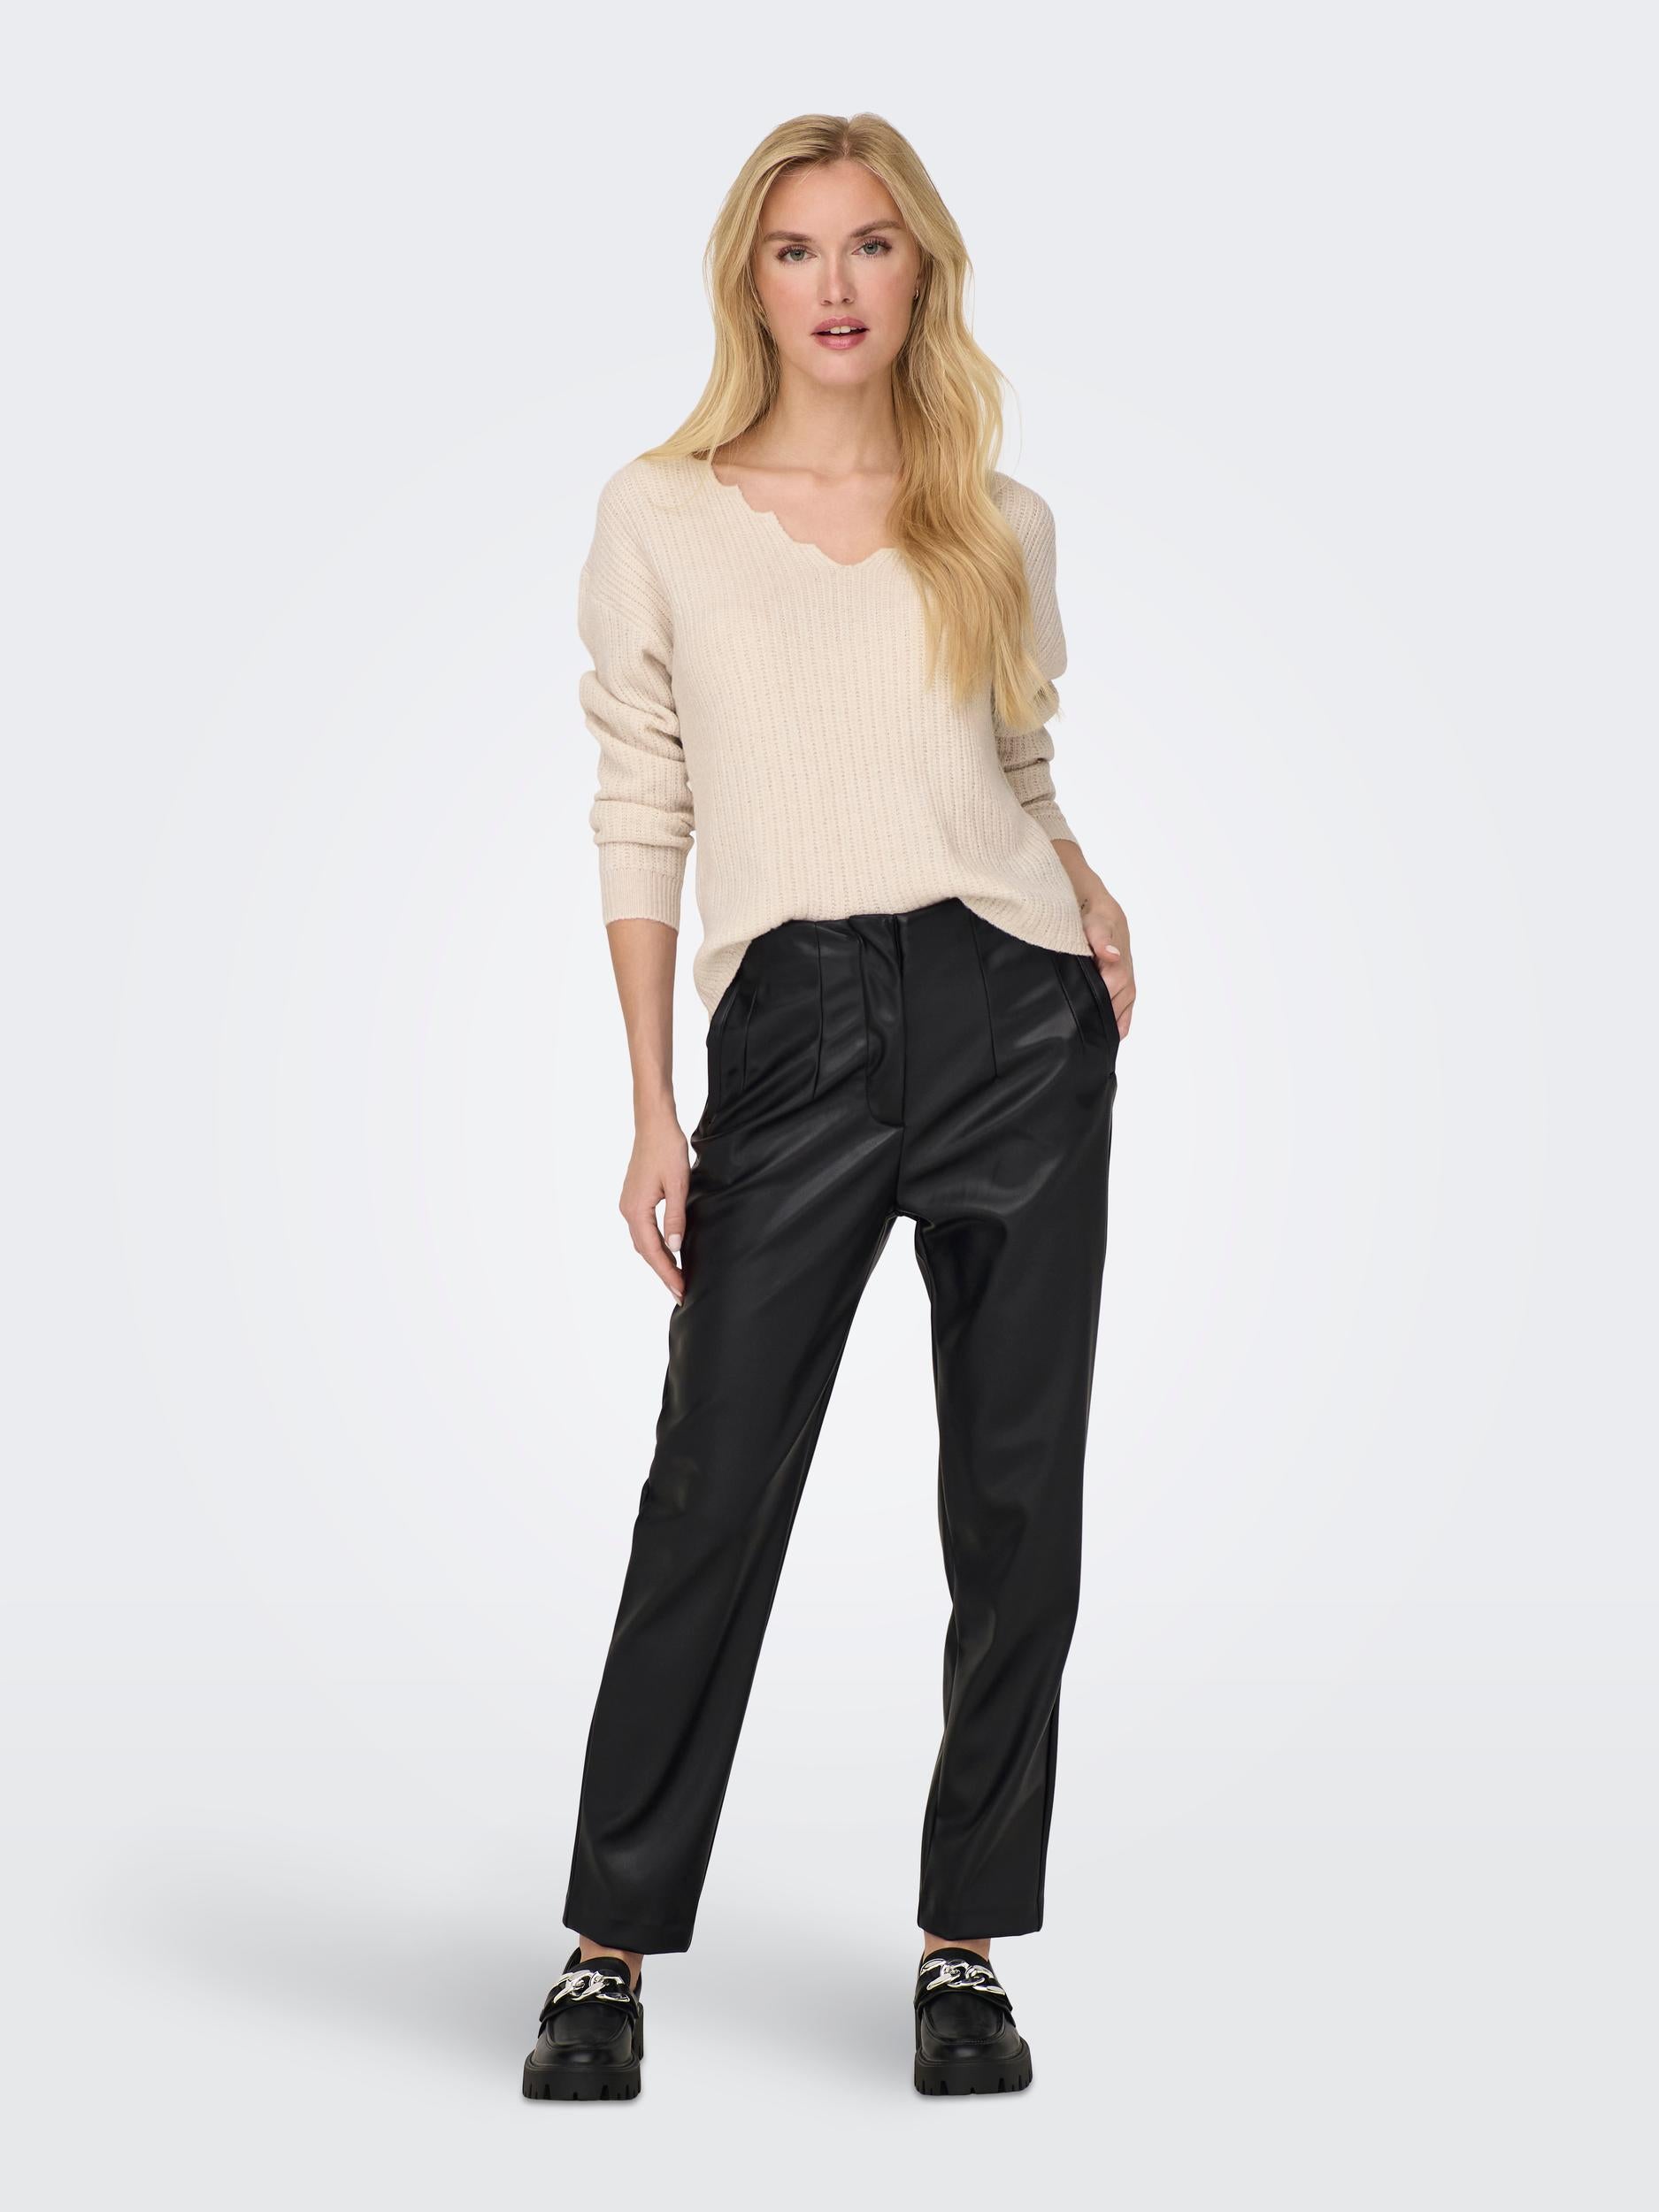 Ladies Raven Idina High Waist Faux Leather Pant-Black-Model Full Front View